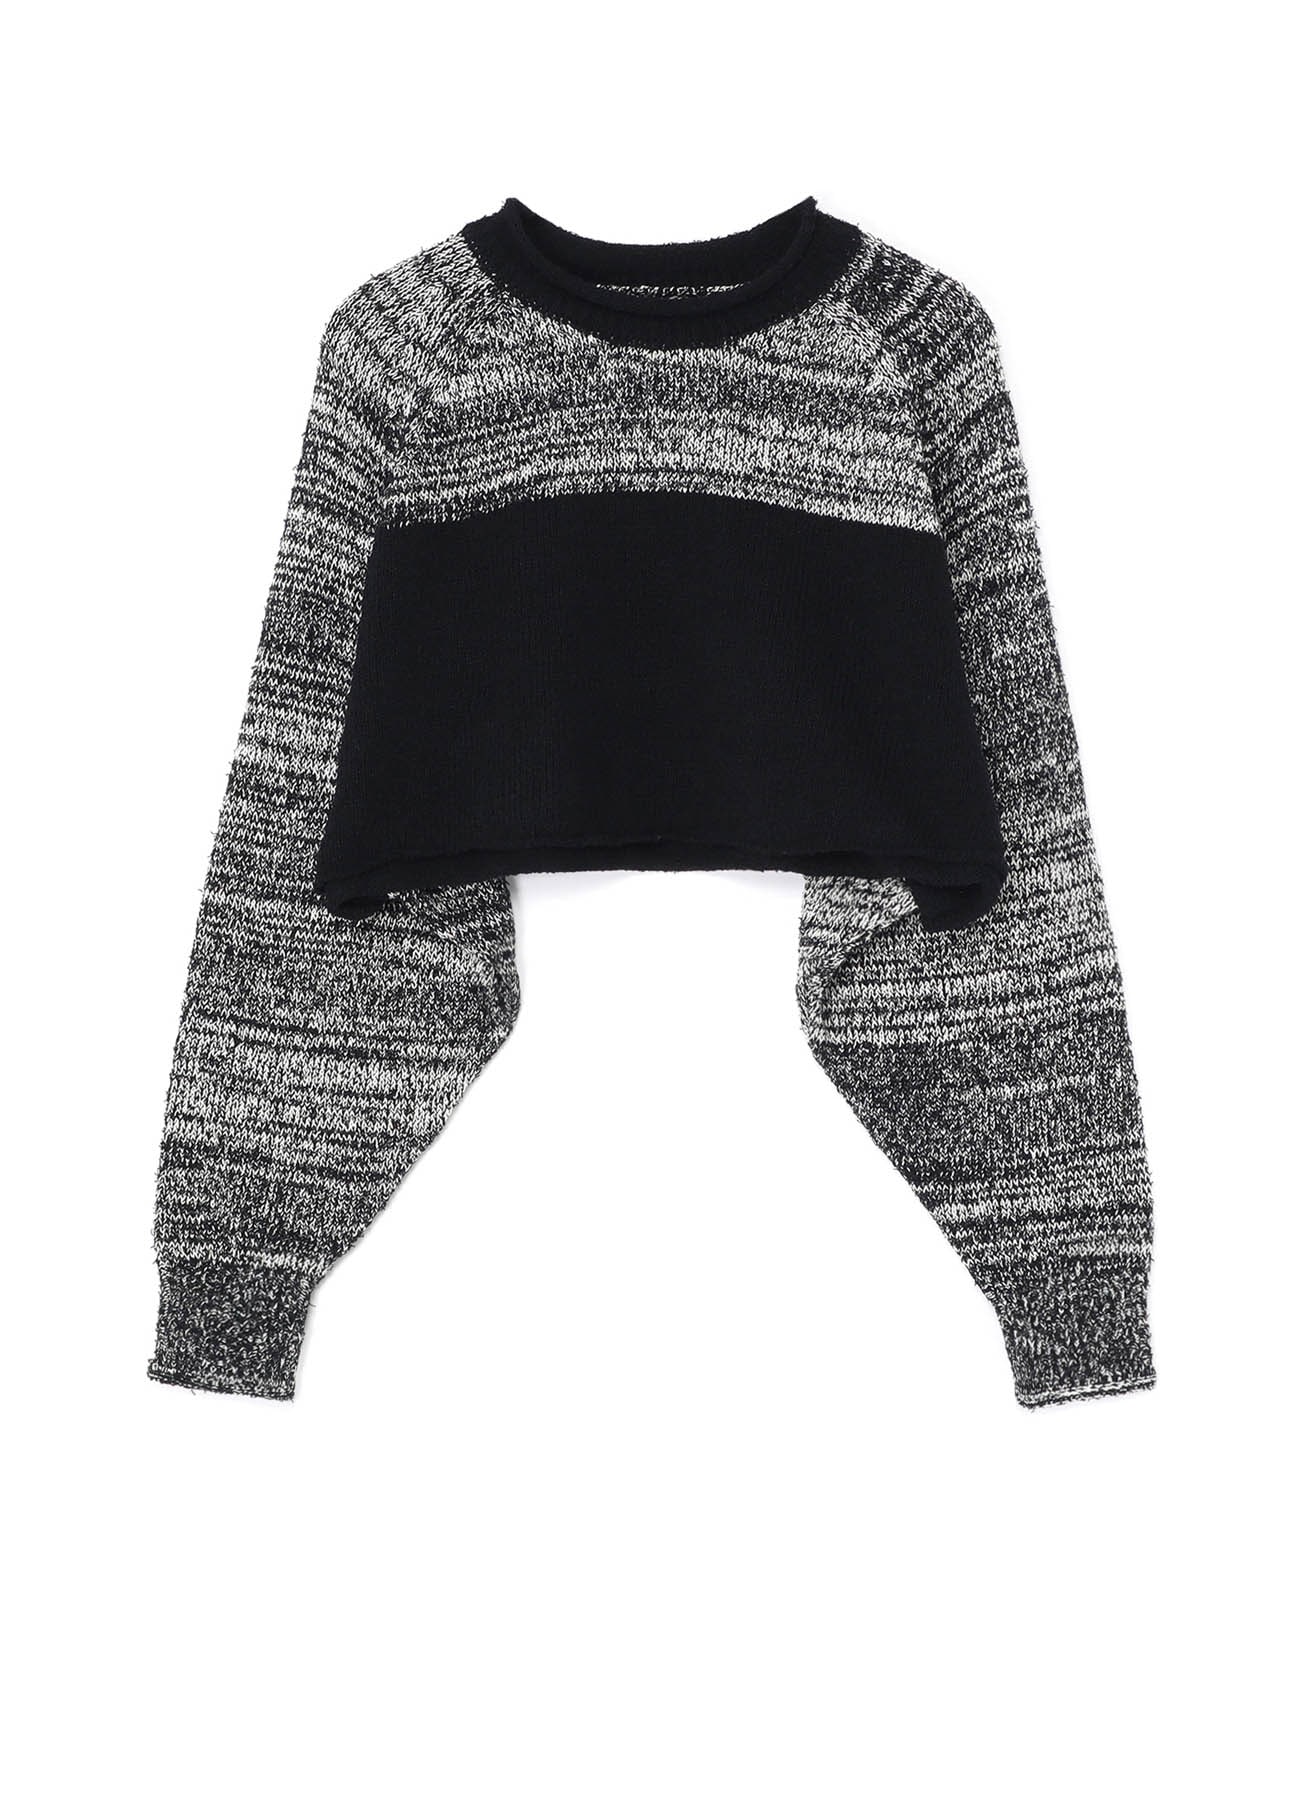 CURLY YARN RAGLAN SLEEVE CROPPED PULLOVER(S Black): Y's｜THE SHOP 